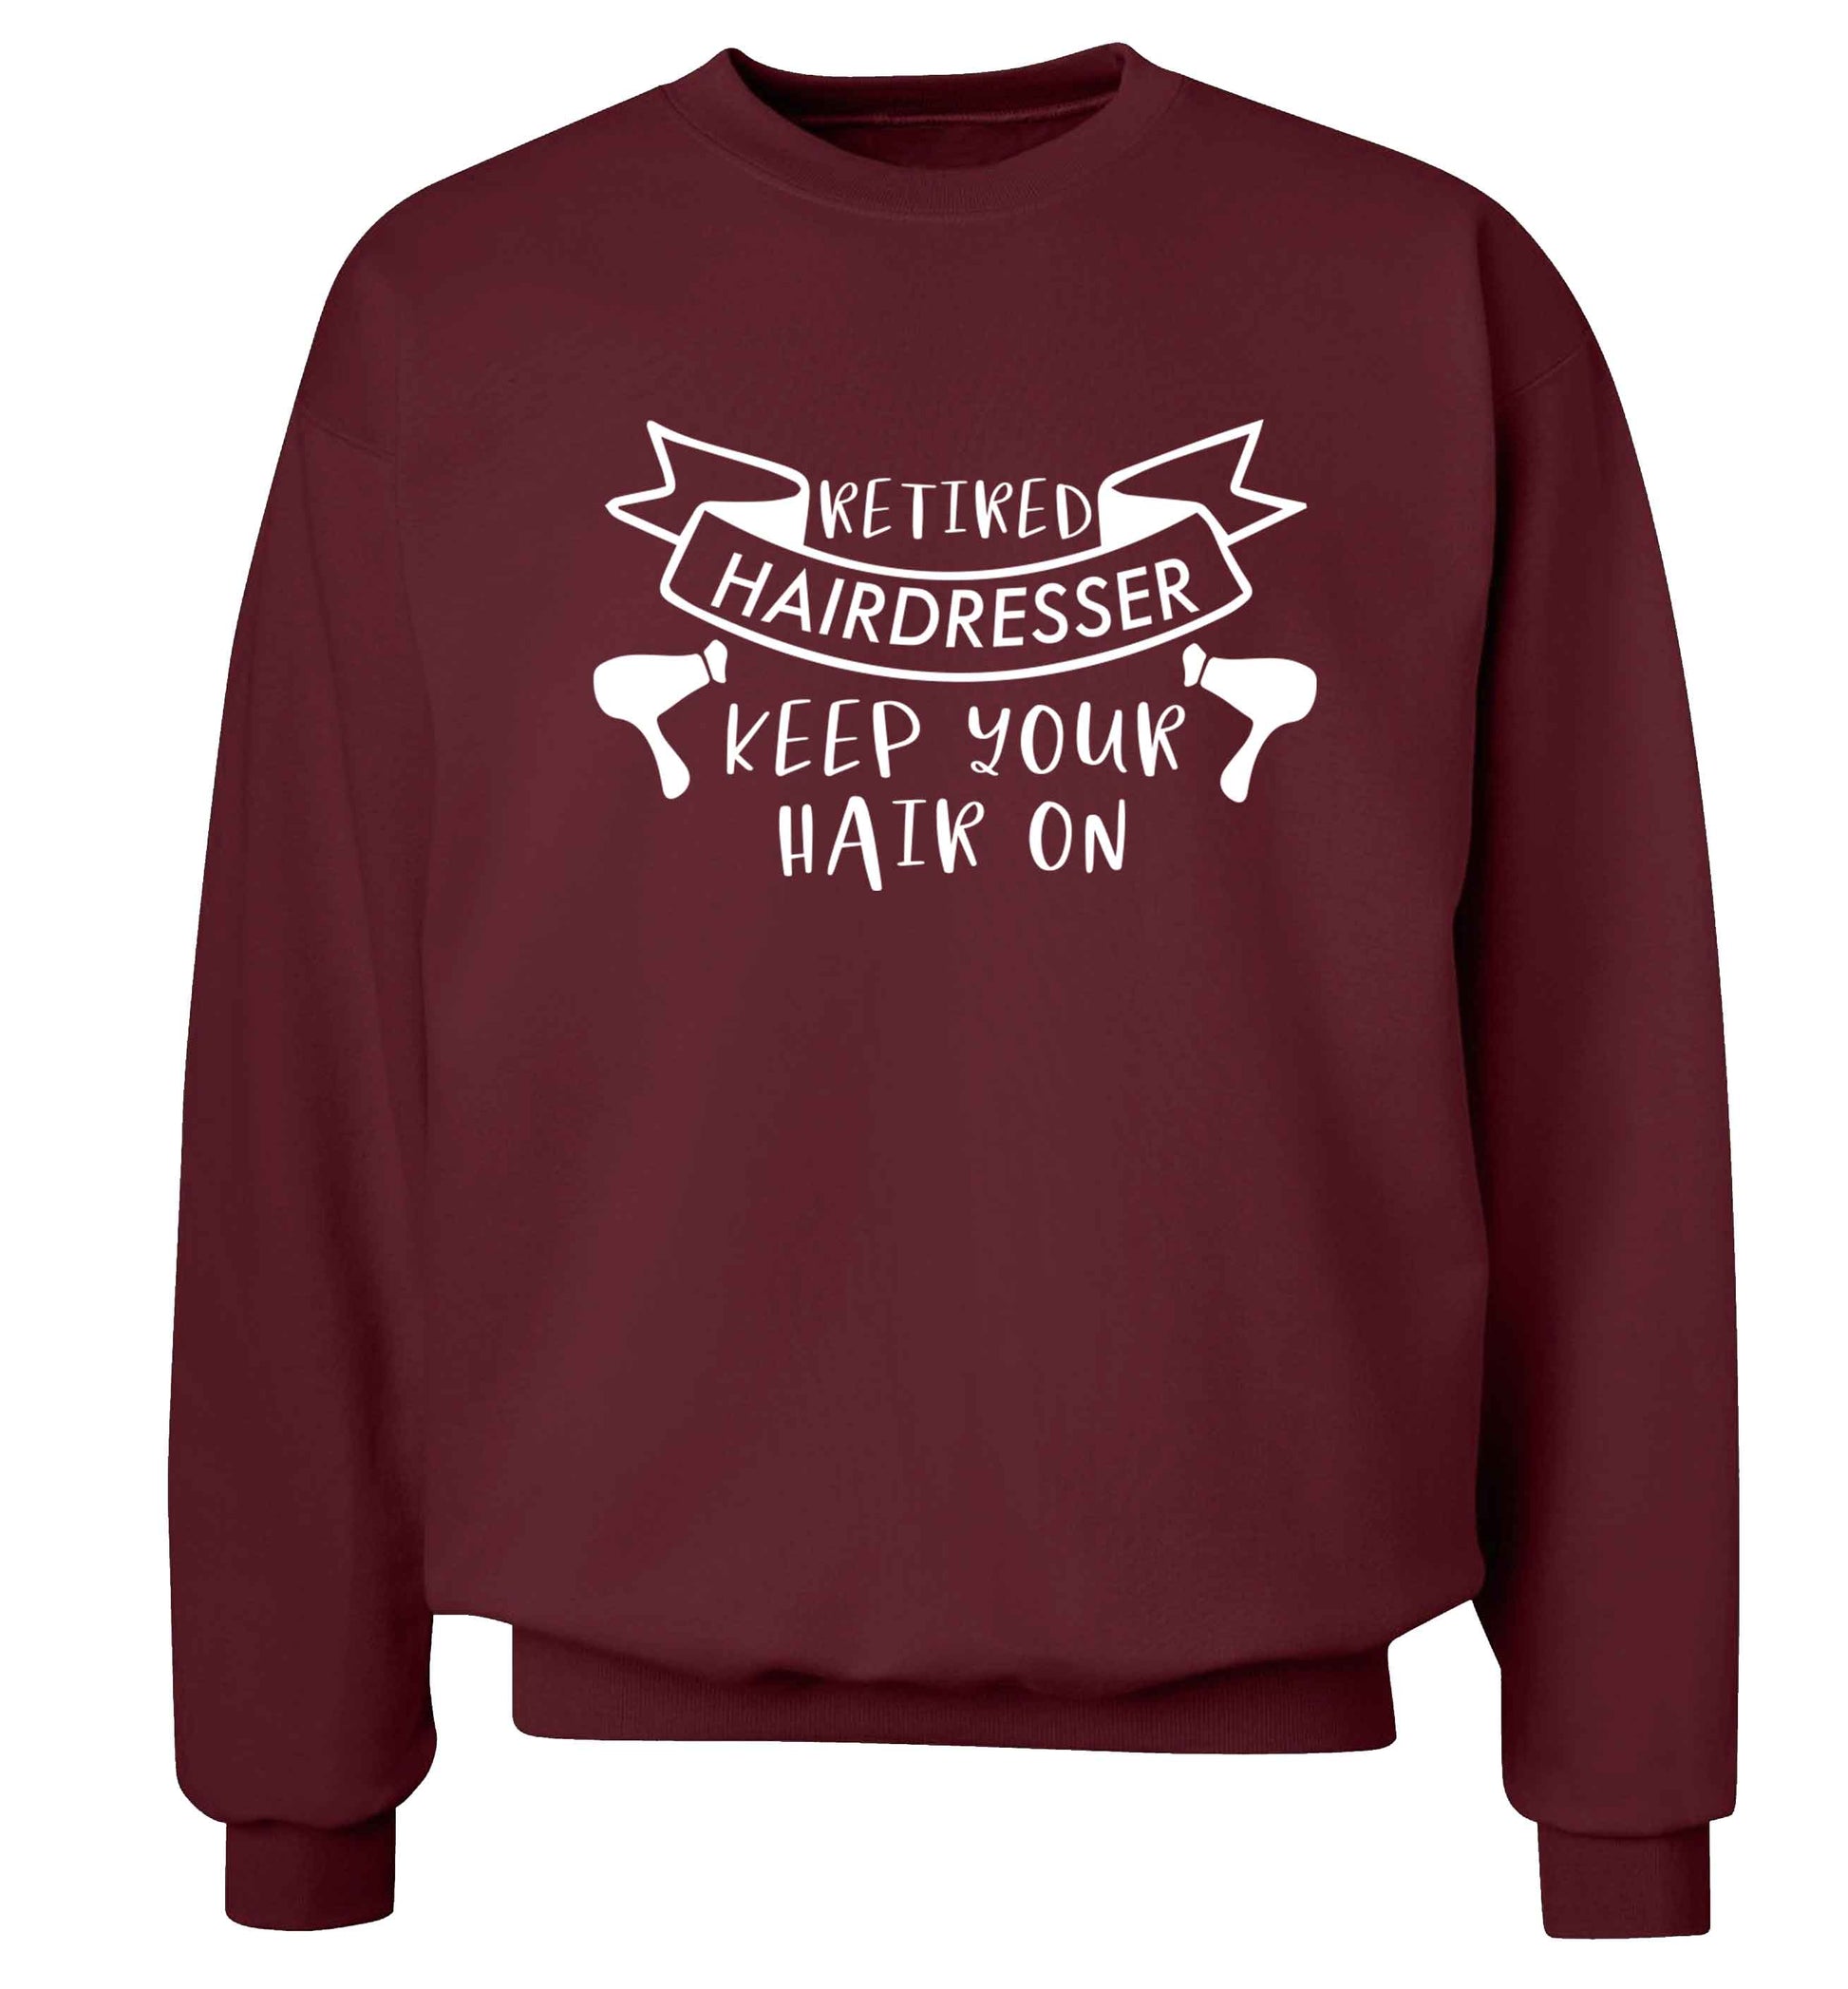 Retired hairdresser keep your hair on Adult's unisex maroon Sweater 2XL